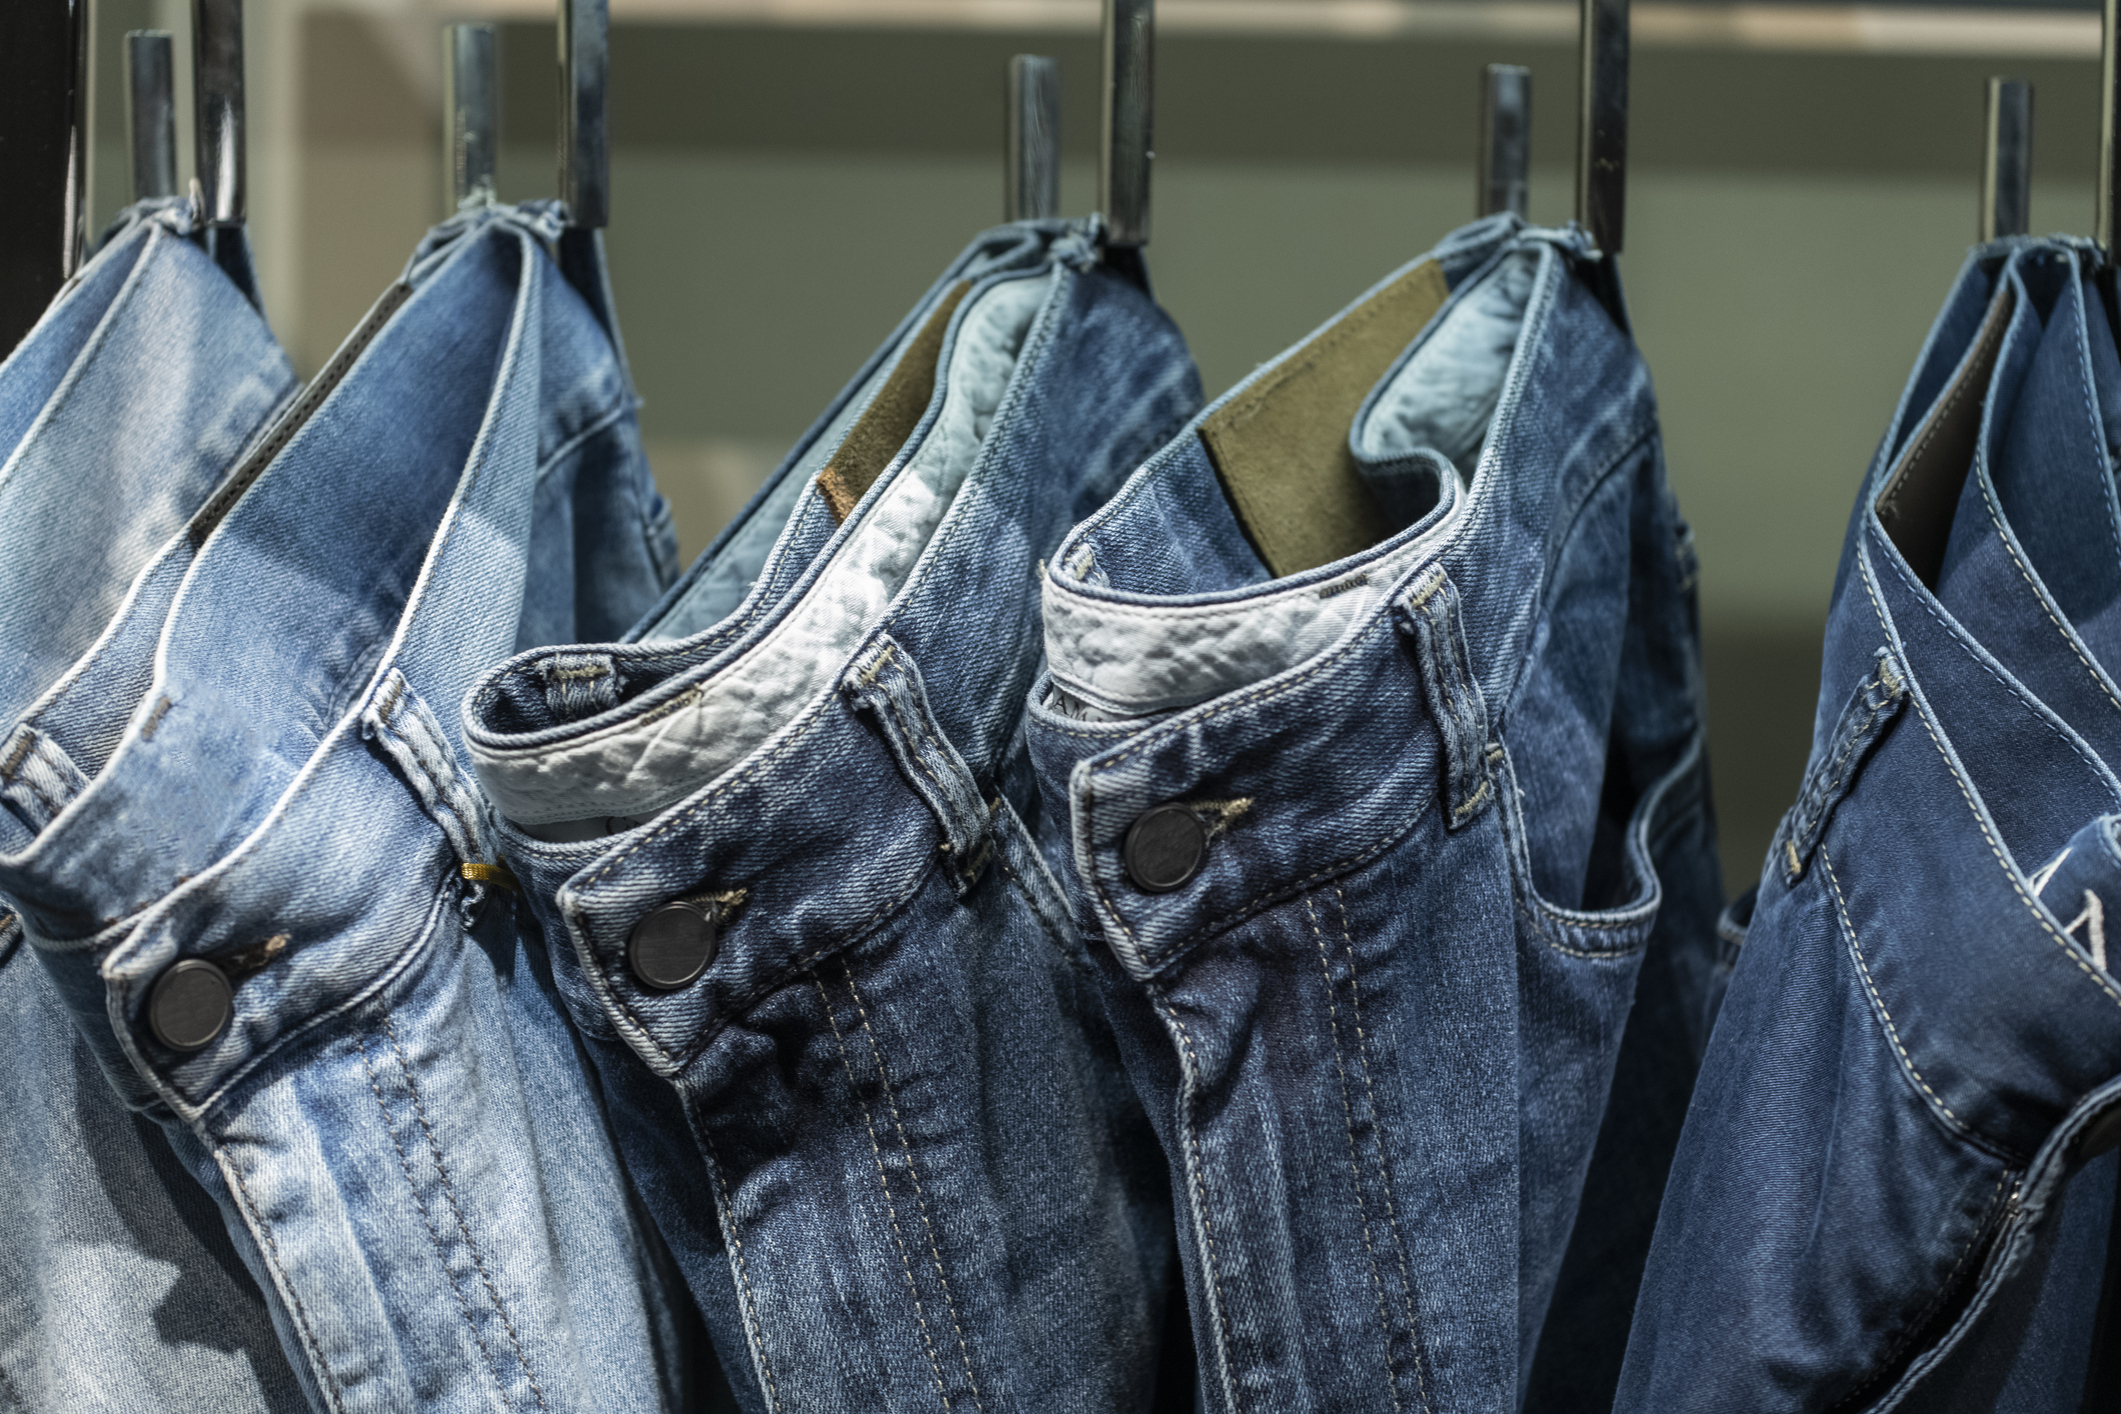 Rack of Jeans